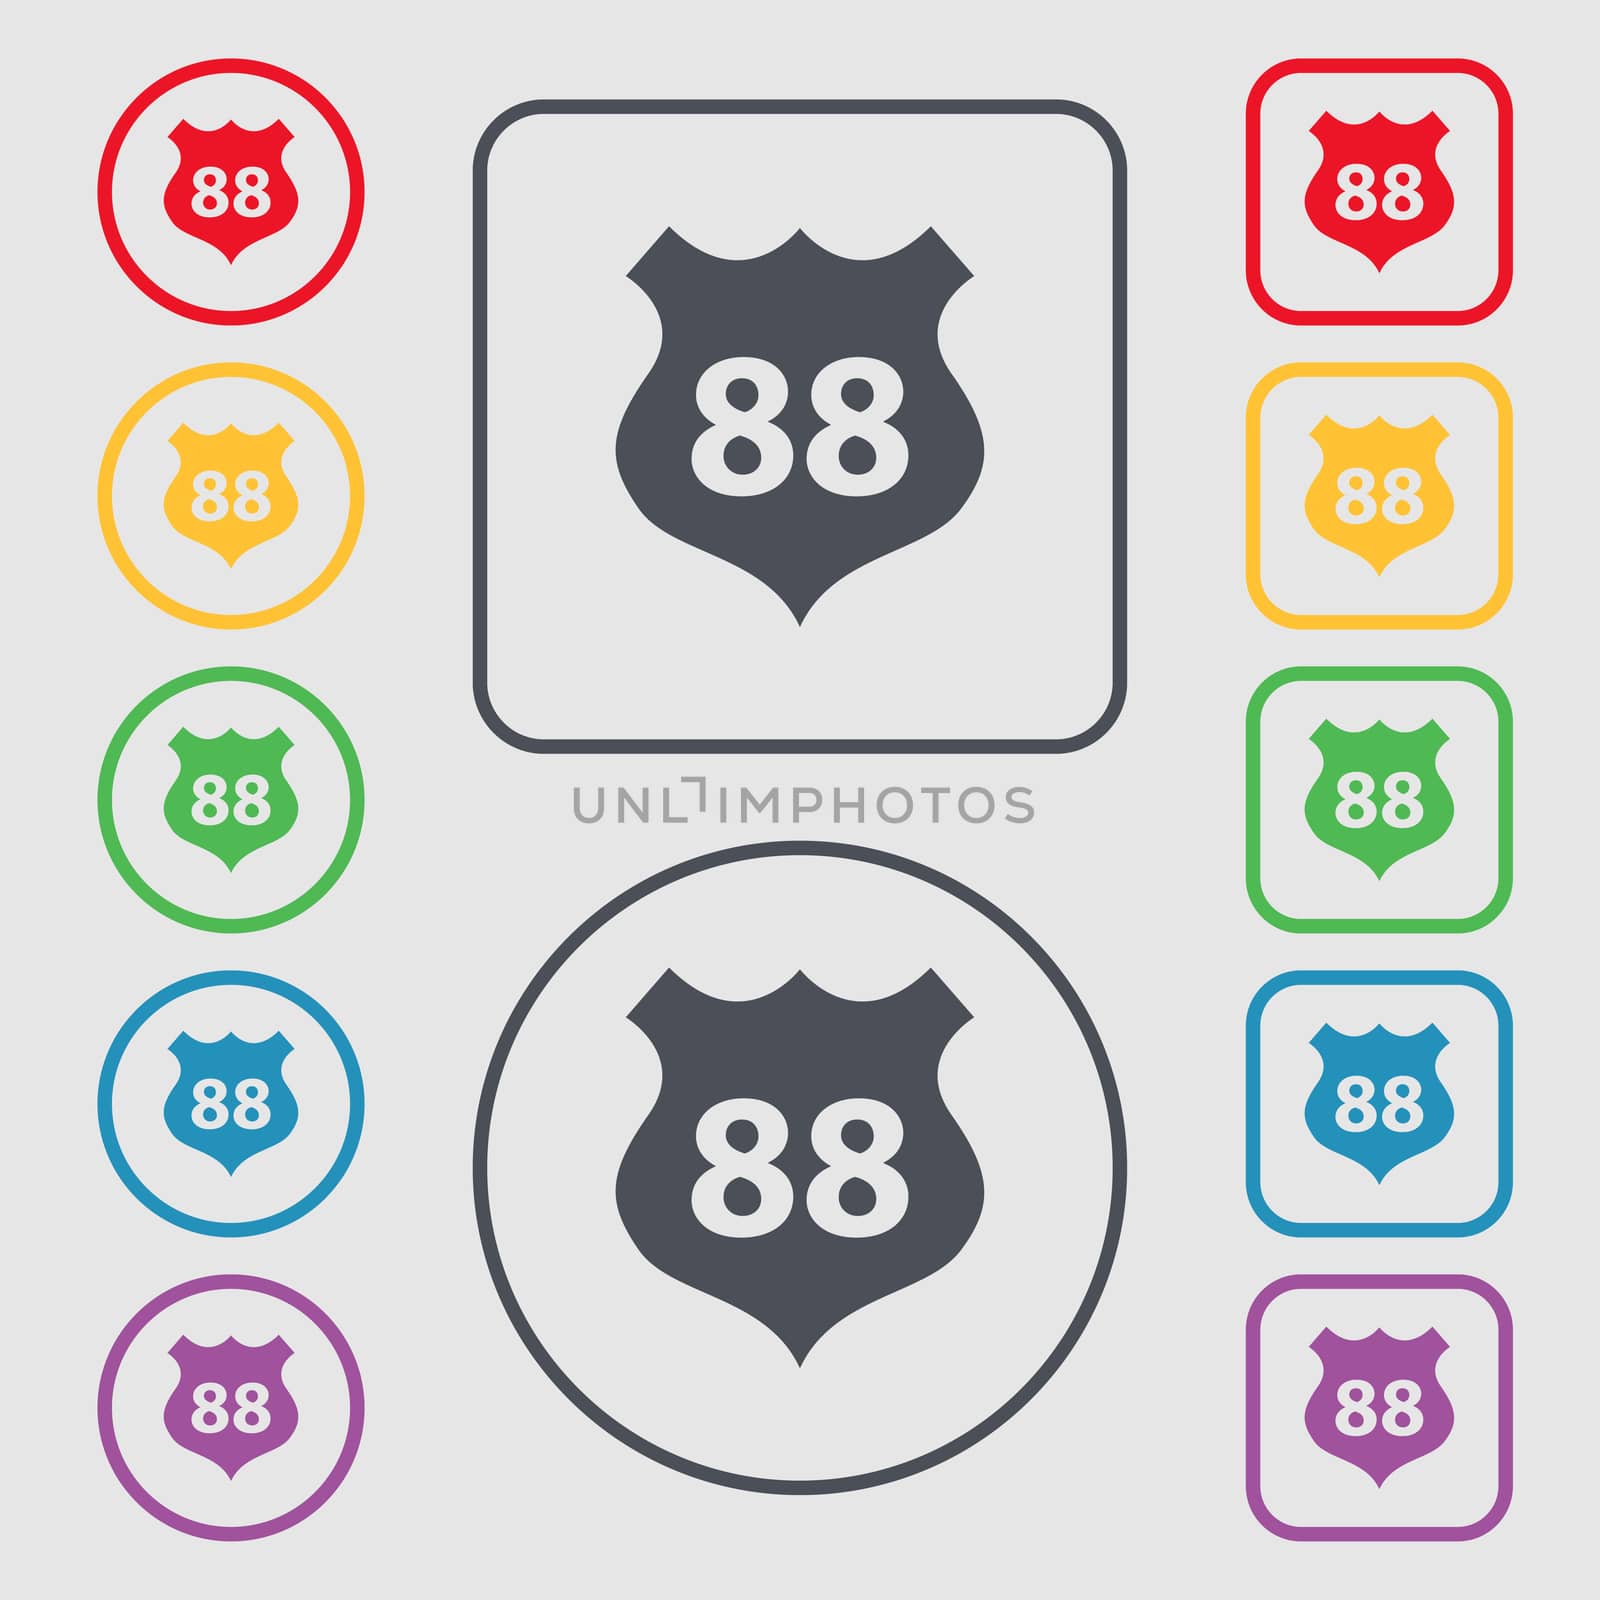 Route 88 highway icon sign. Symbols on the Round and square buttons with frame. illustration